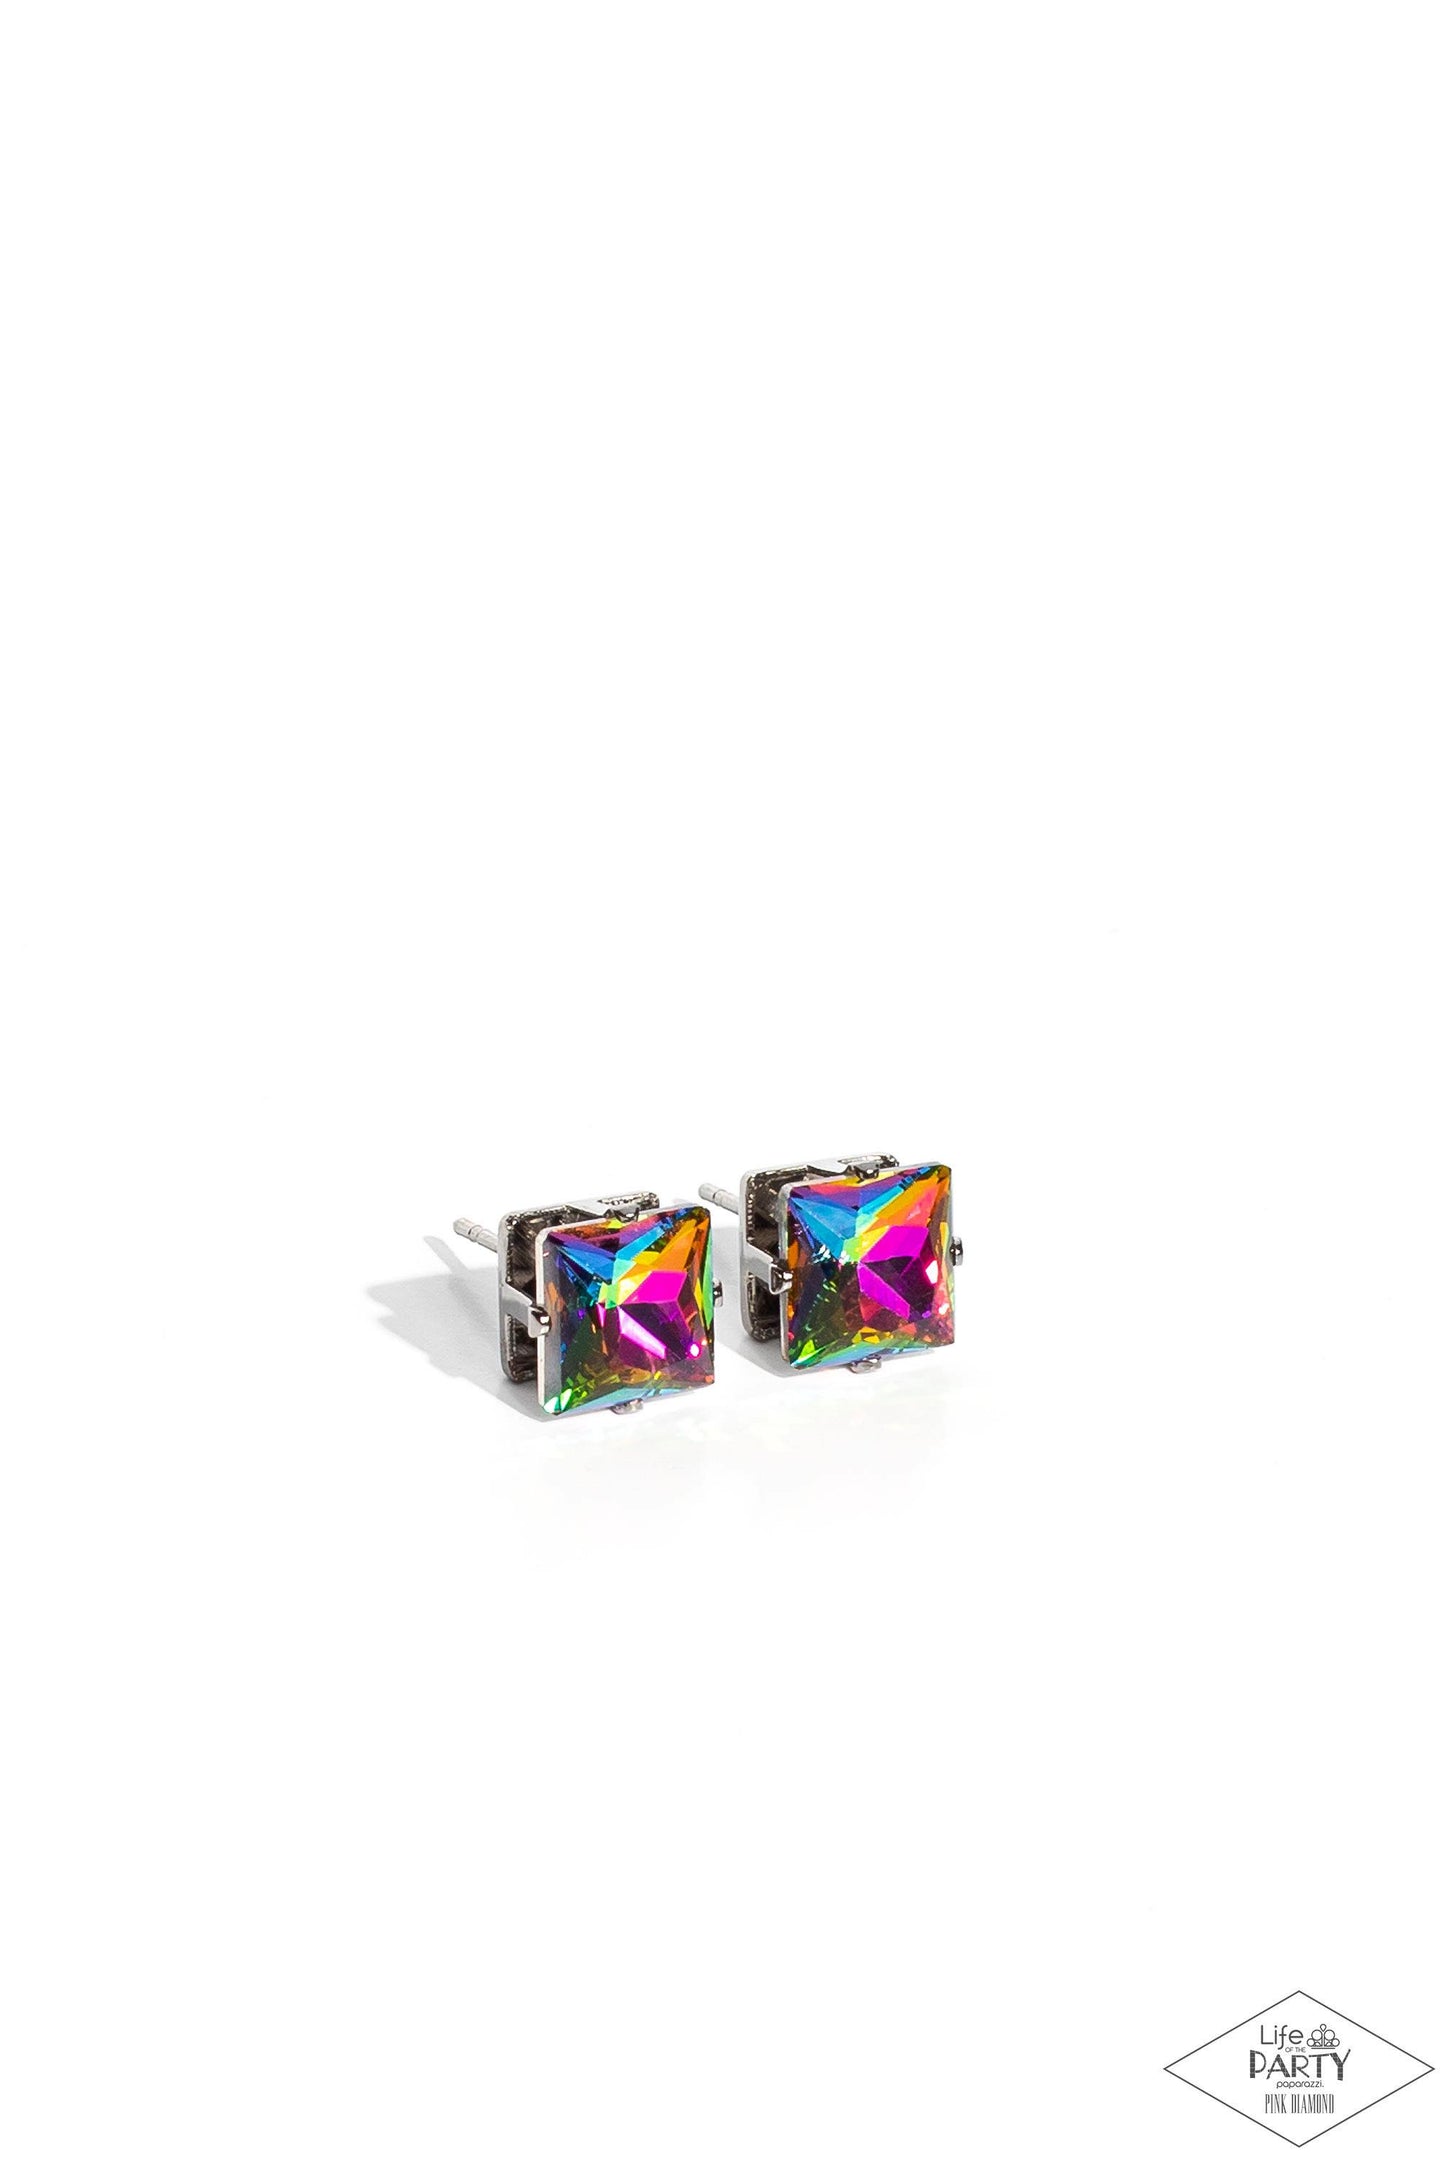 Girls Will Be Girls - PINK Diamond Exclusive Multi Post Earring D058